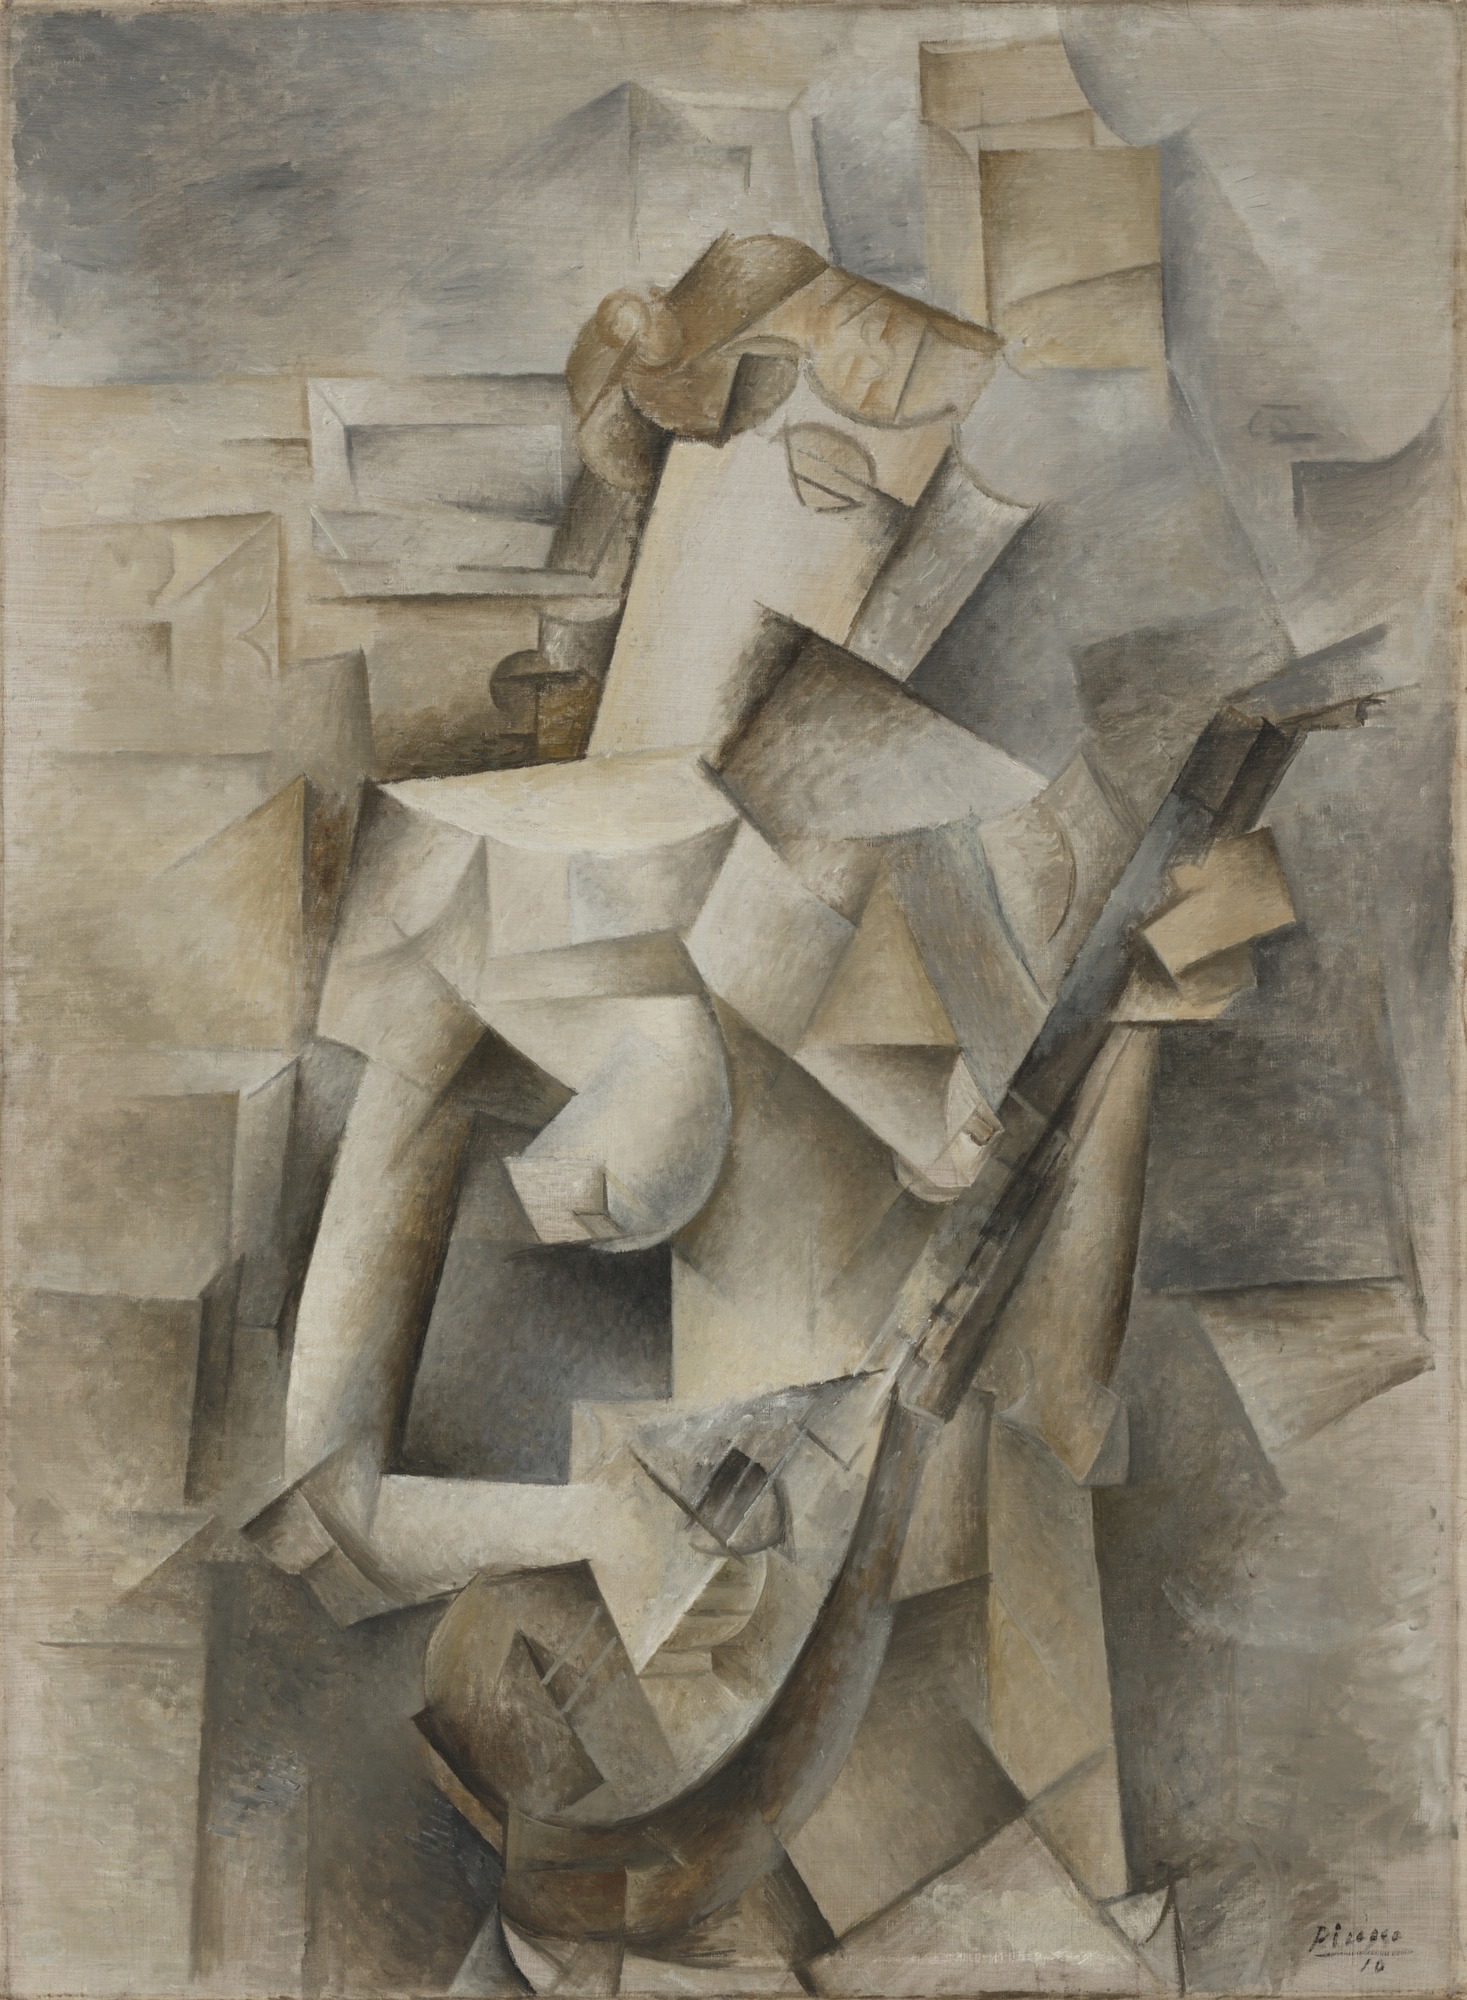 Pablo Picasso, Girl with a Mandolin (Fanny Tellier), 1910, oil on canvas, 39 1/2 x 29 inches (MoMA)